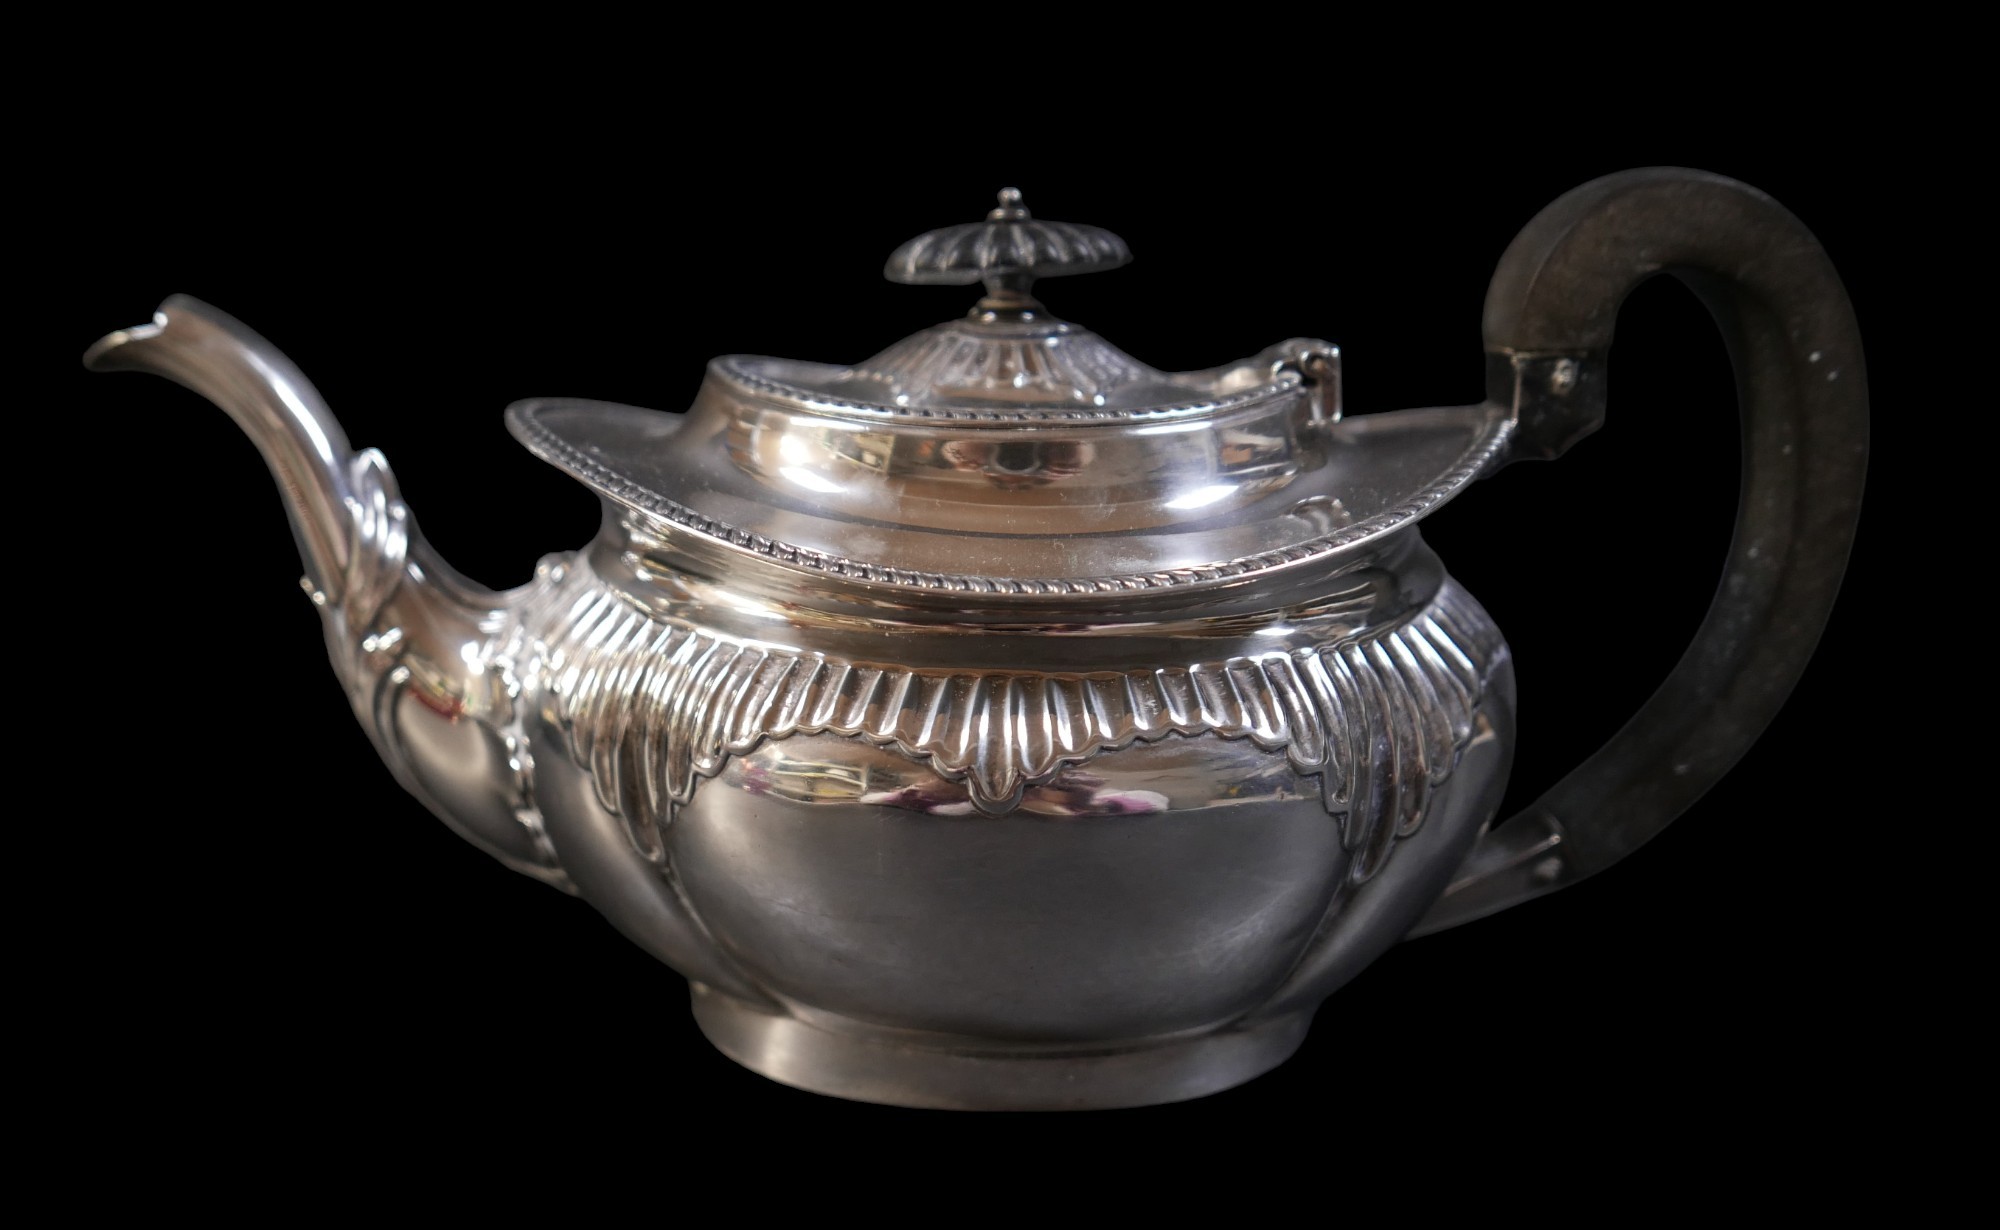 An Edwardian silver tea pot, with ebony finial and handle, Jenkins & Timm, Sheffield, 1901, 17. - Image 2 of 5